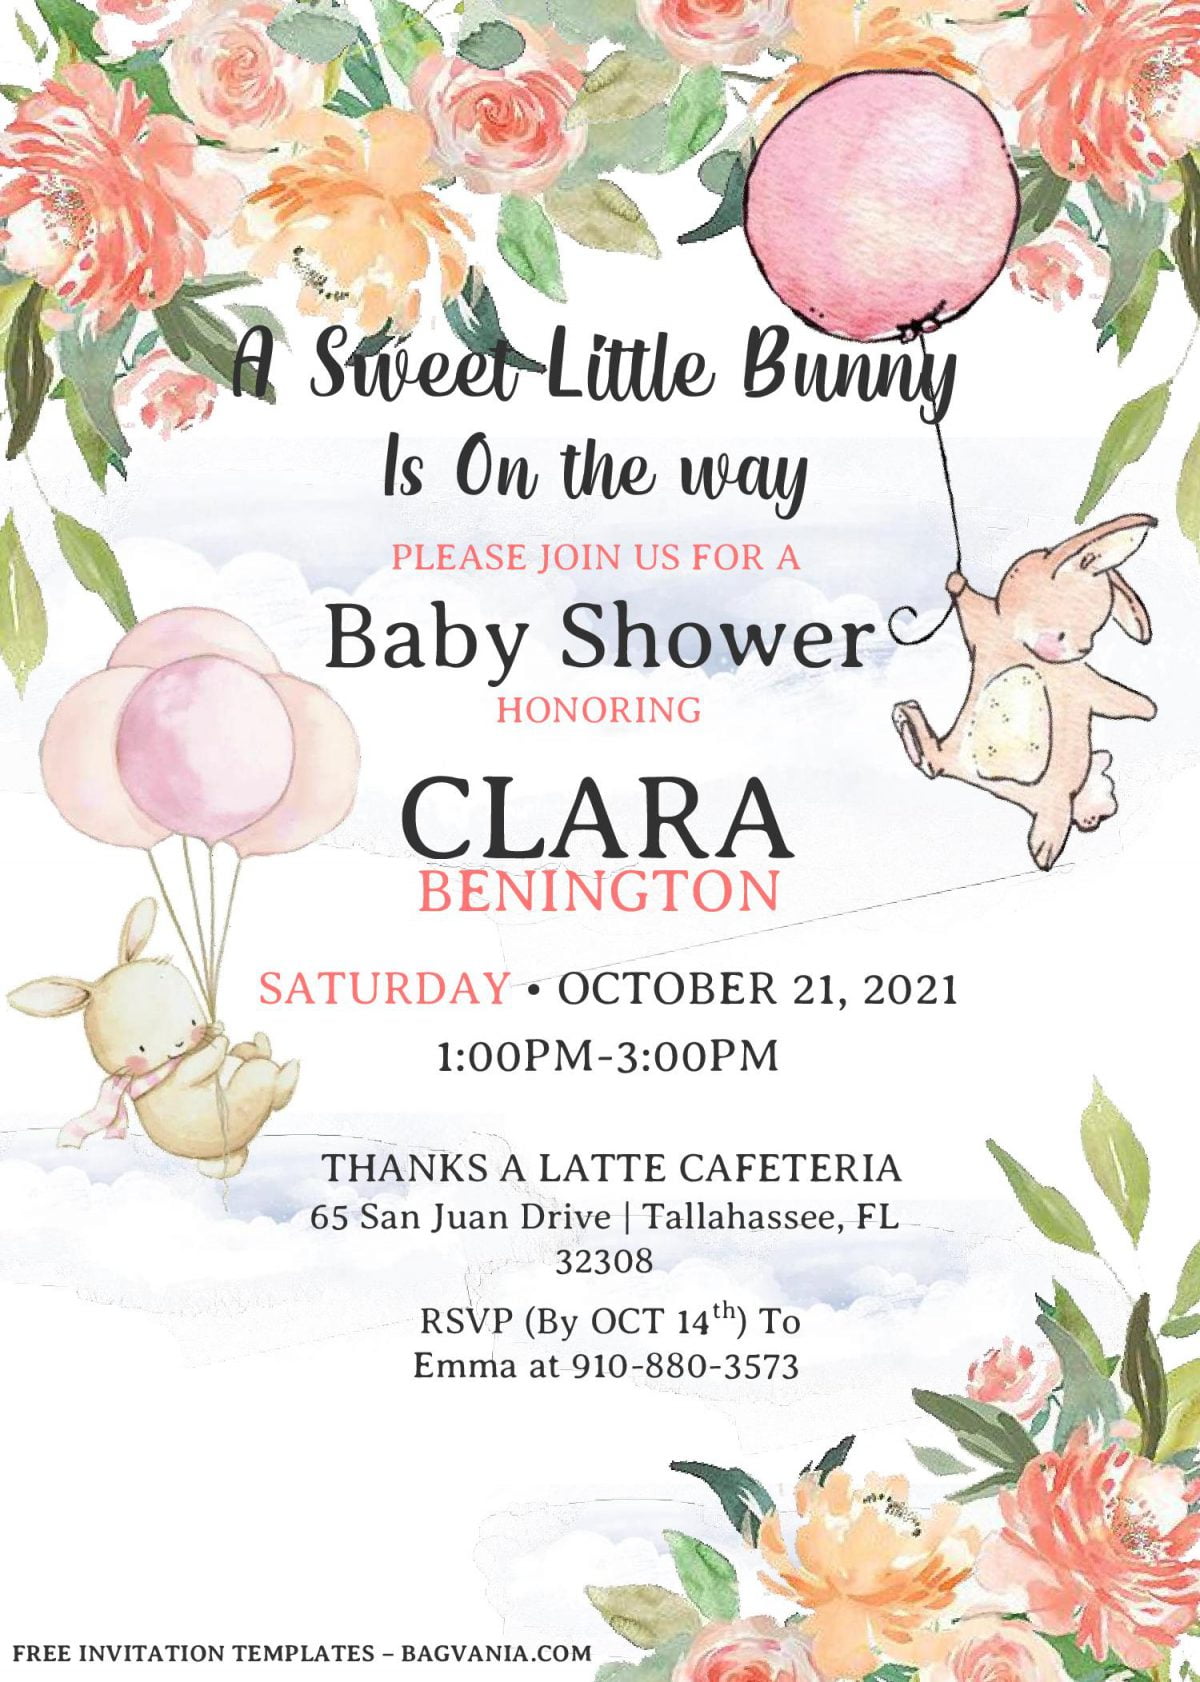 Some Bunny Invitation Templates - Editable With MS Word and has greenery foliage